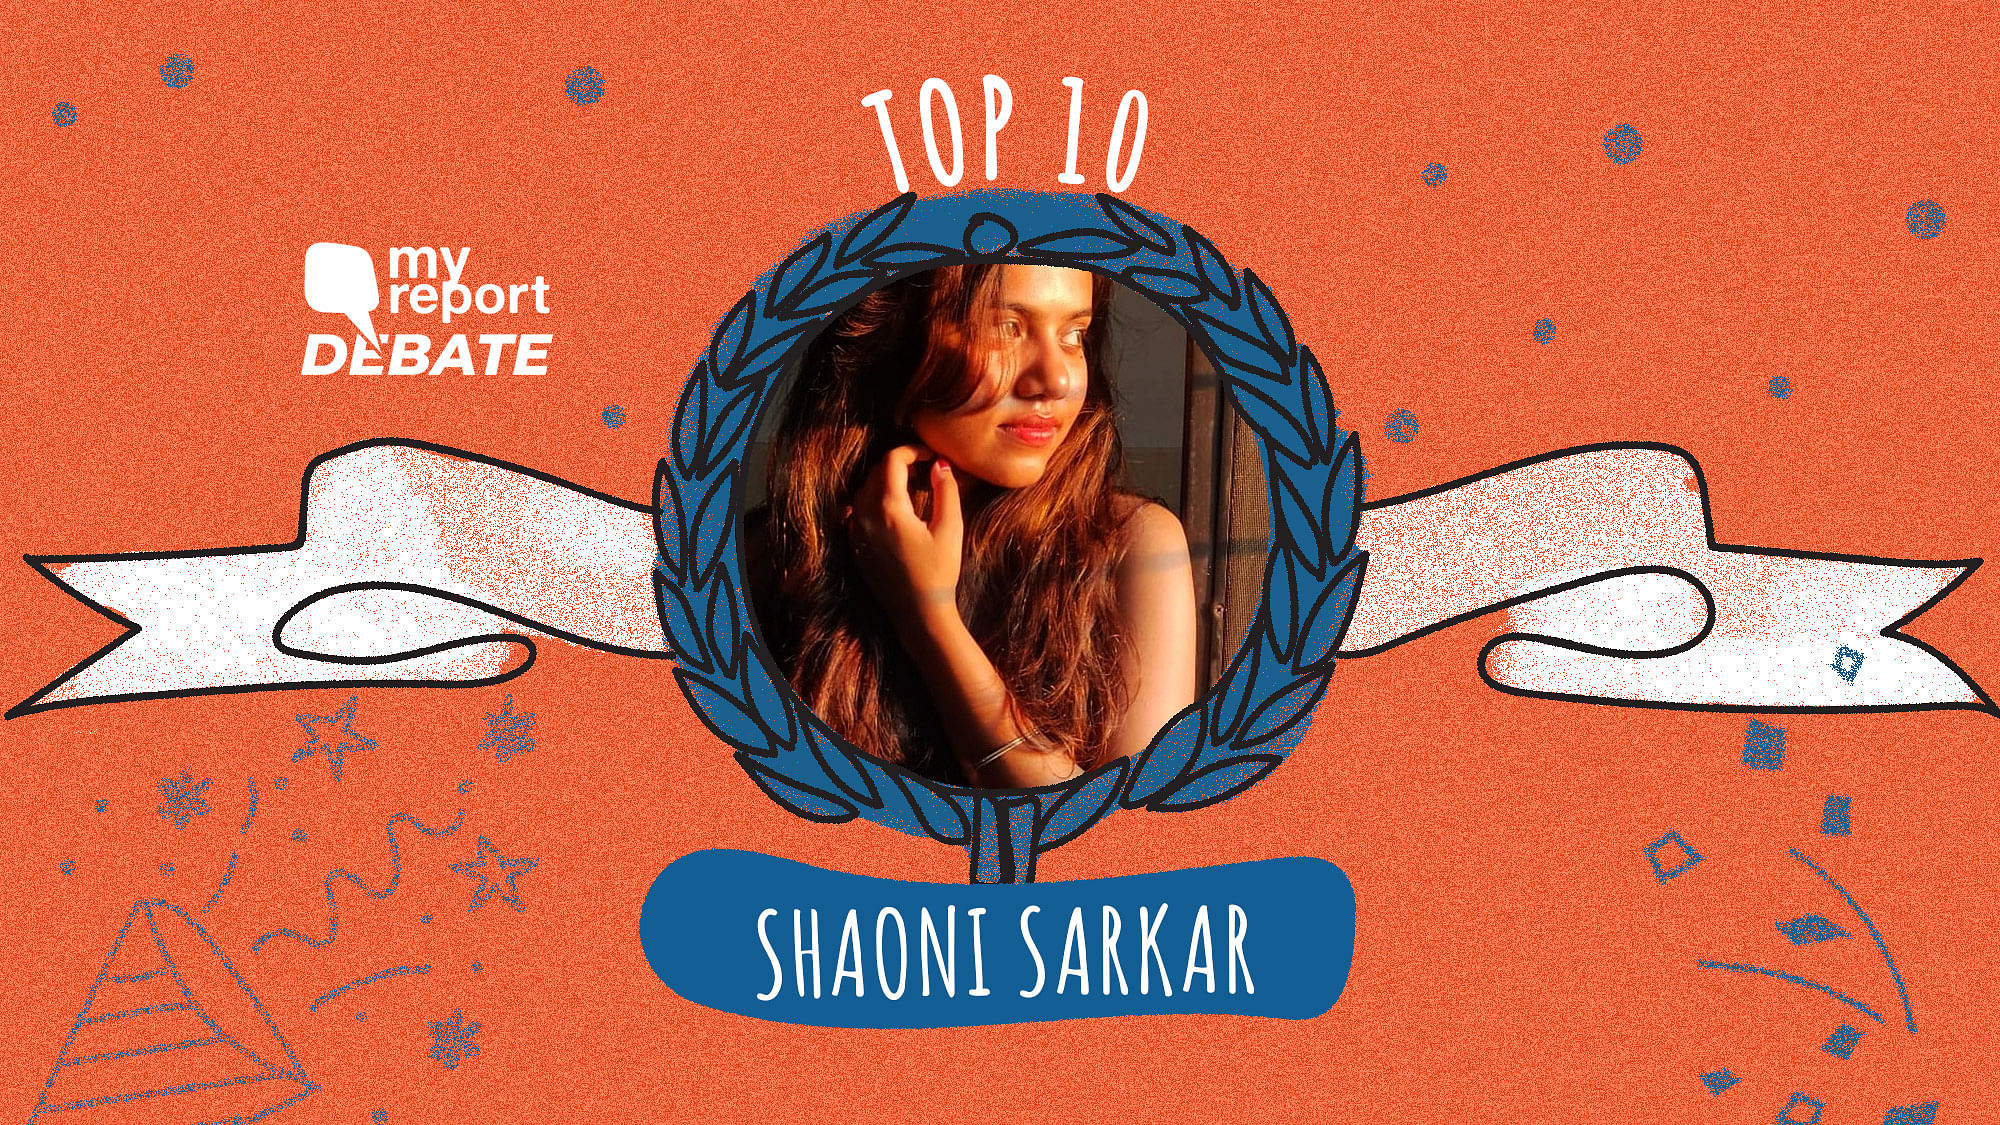 Shaoni Sarkar’s essay is among the Top 10 of the My Report Debate II.